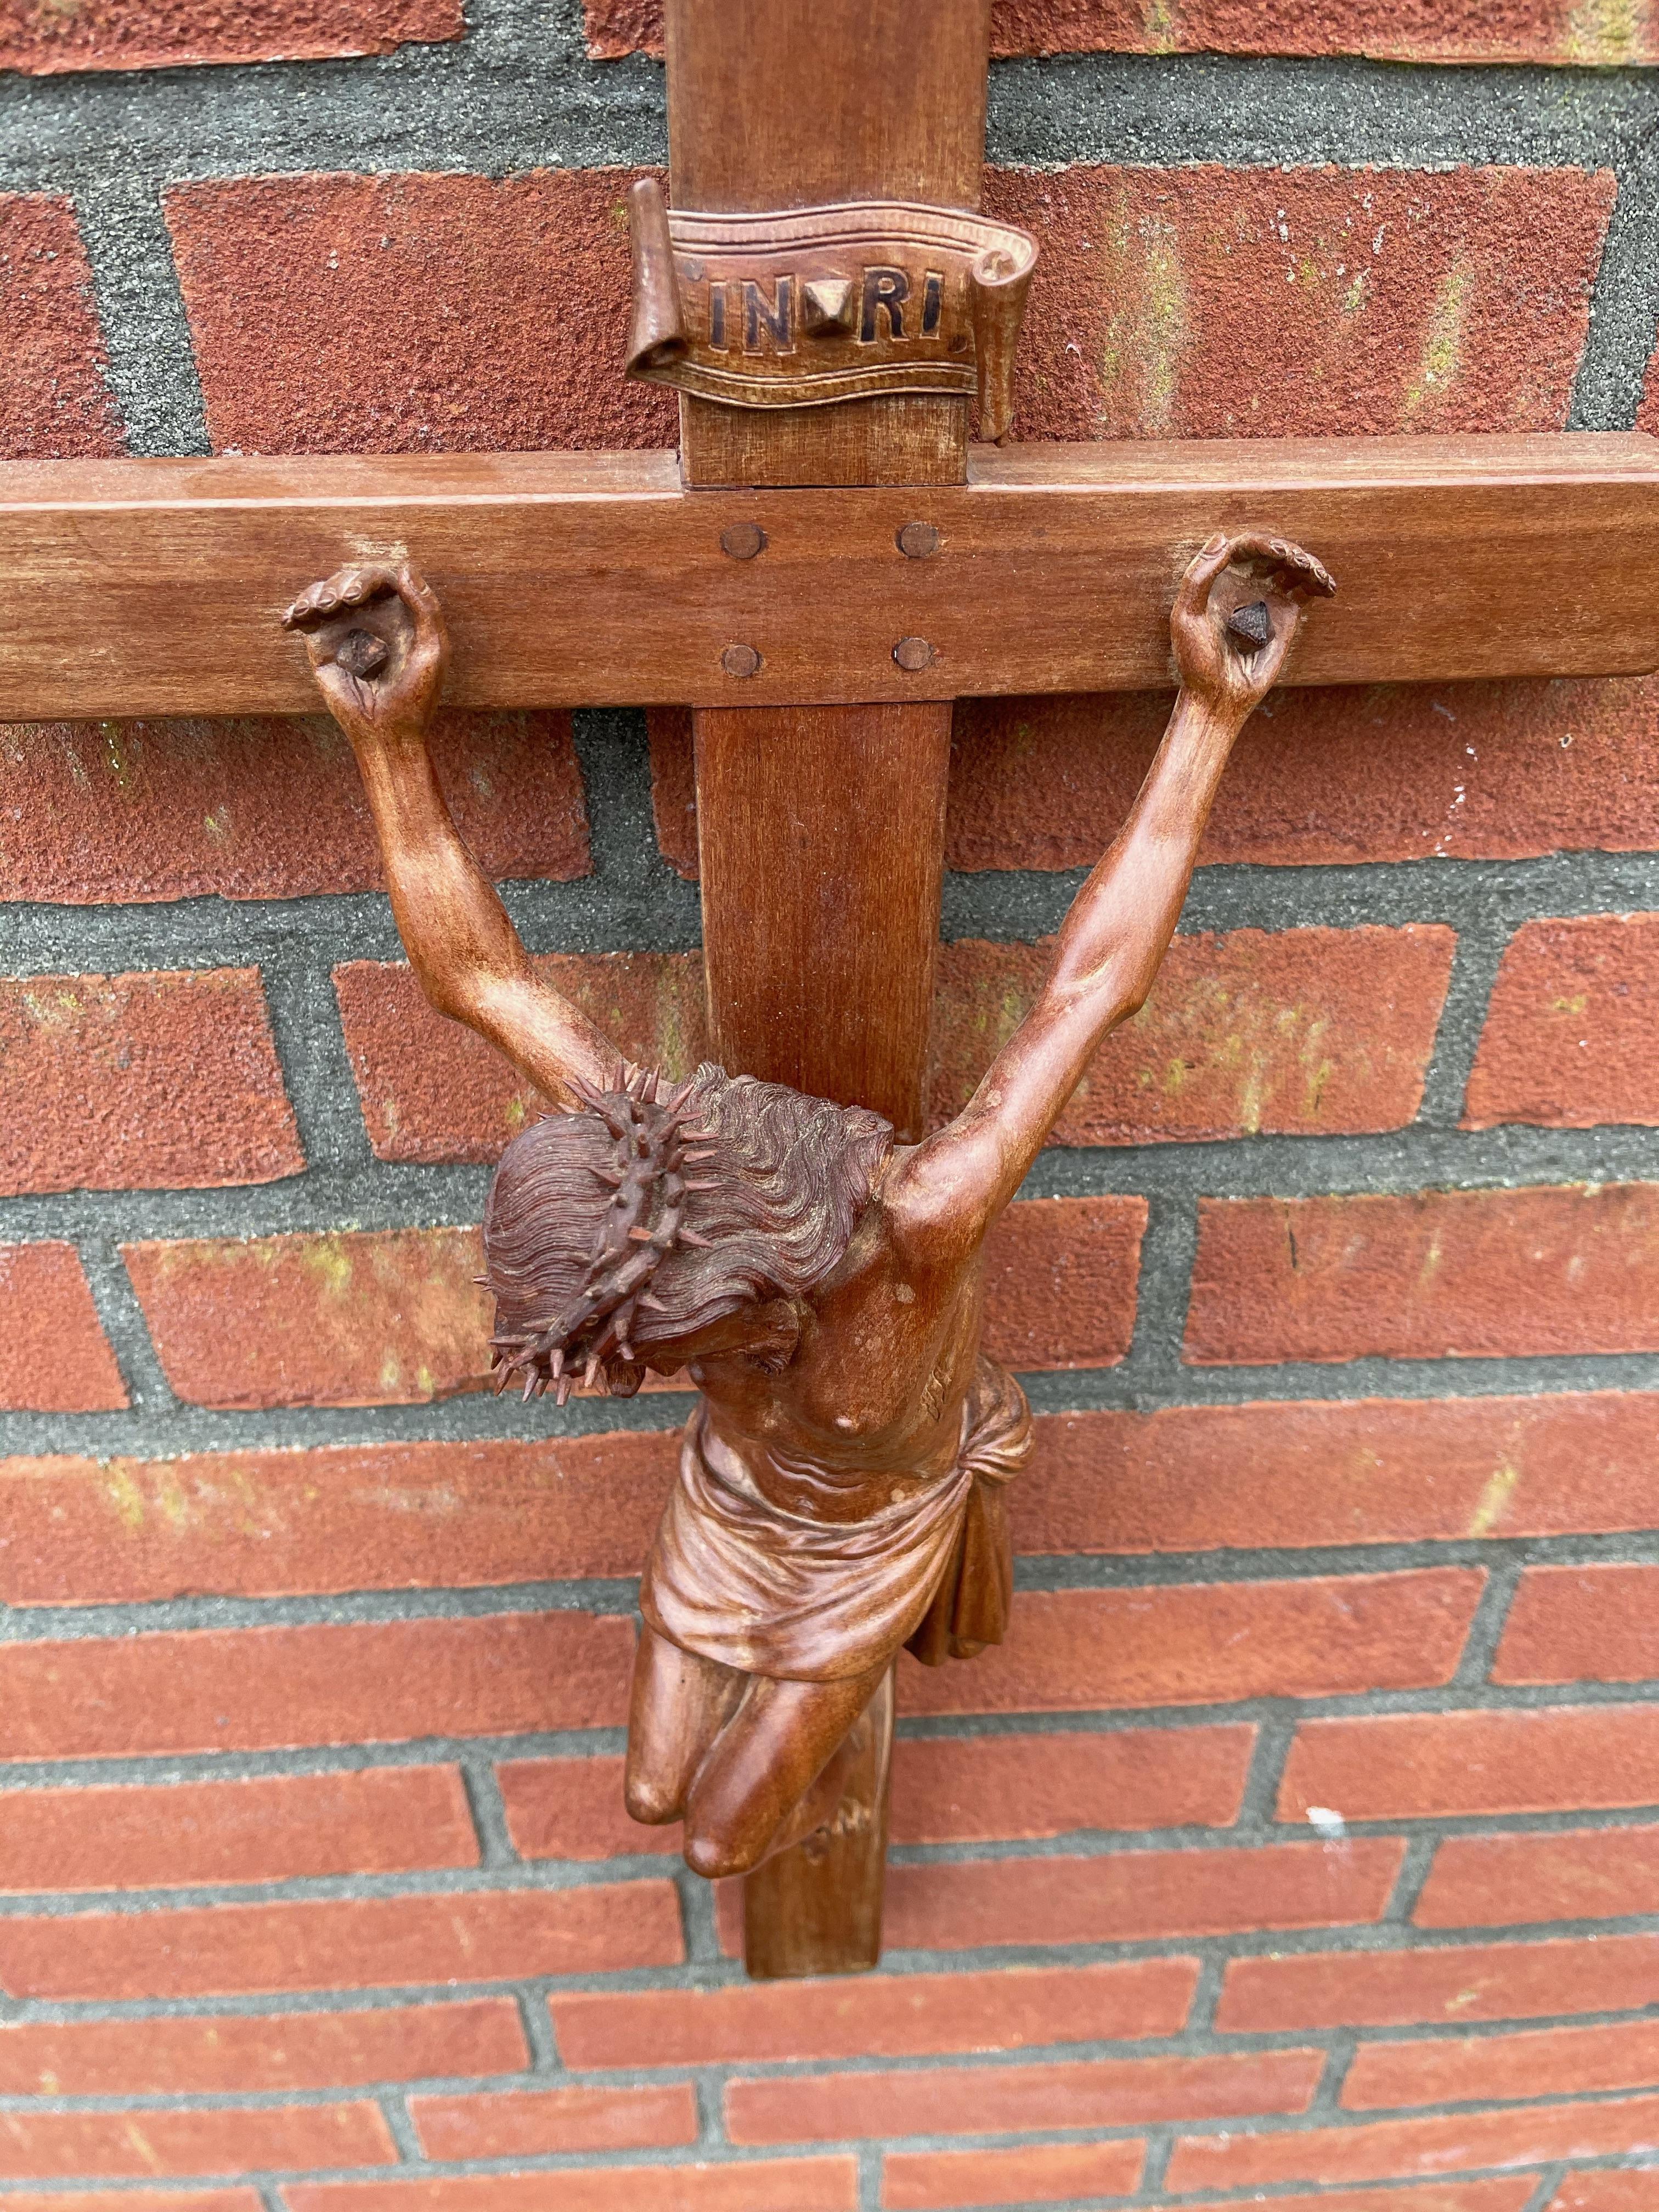 Sizeable crucifix with a quality carved corpus of Christ with unique facial features.

Looking at Christ suffering like this, the crucifix (in our view) is a symbol of what 'telling people the truth' can lead to. 'The truth does not have many